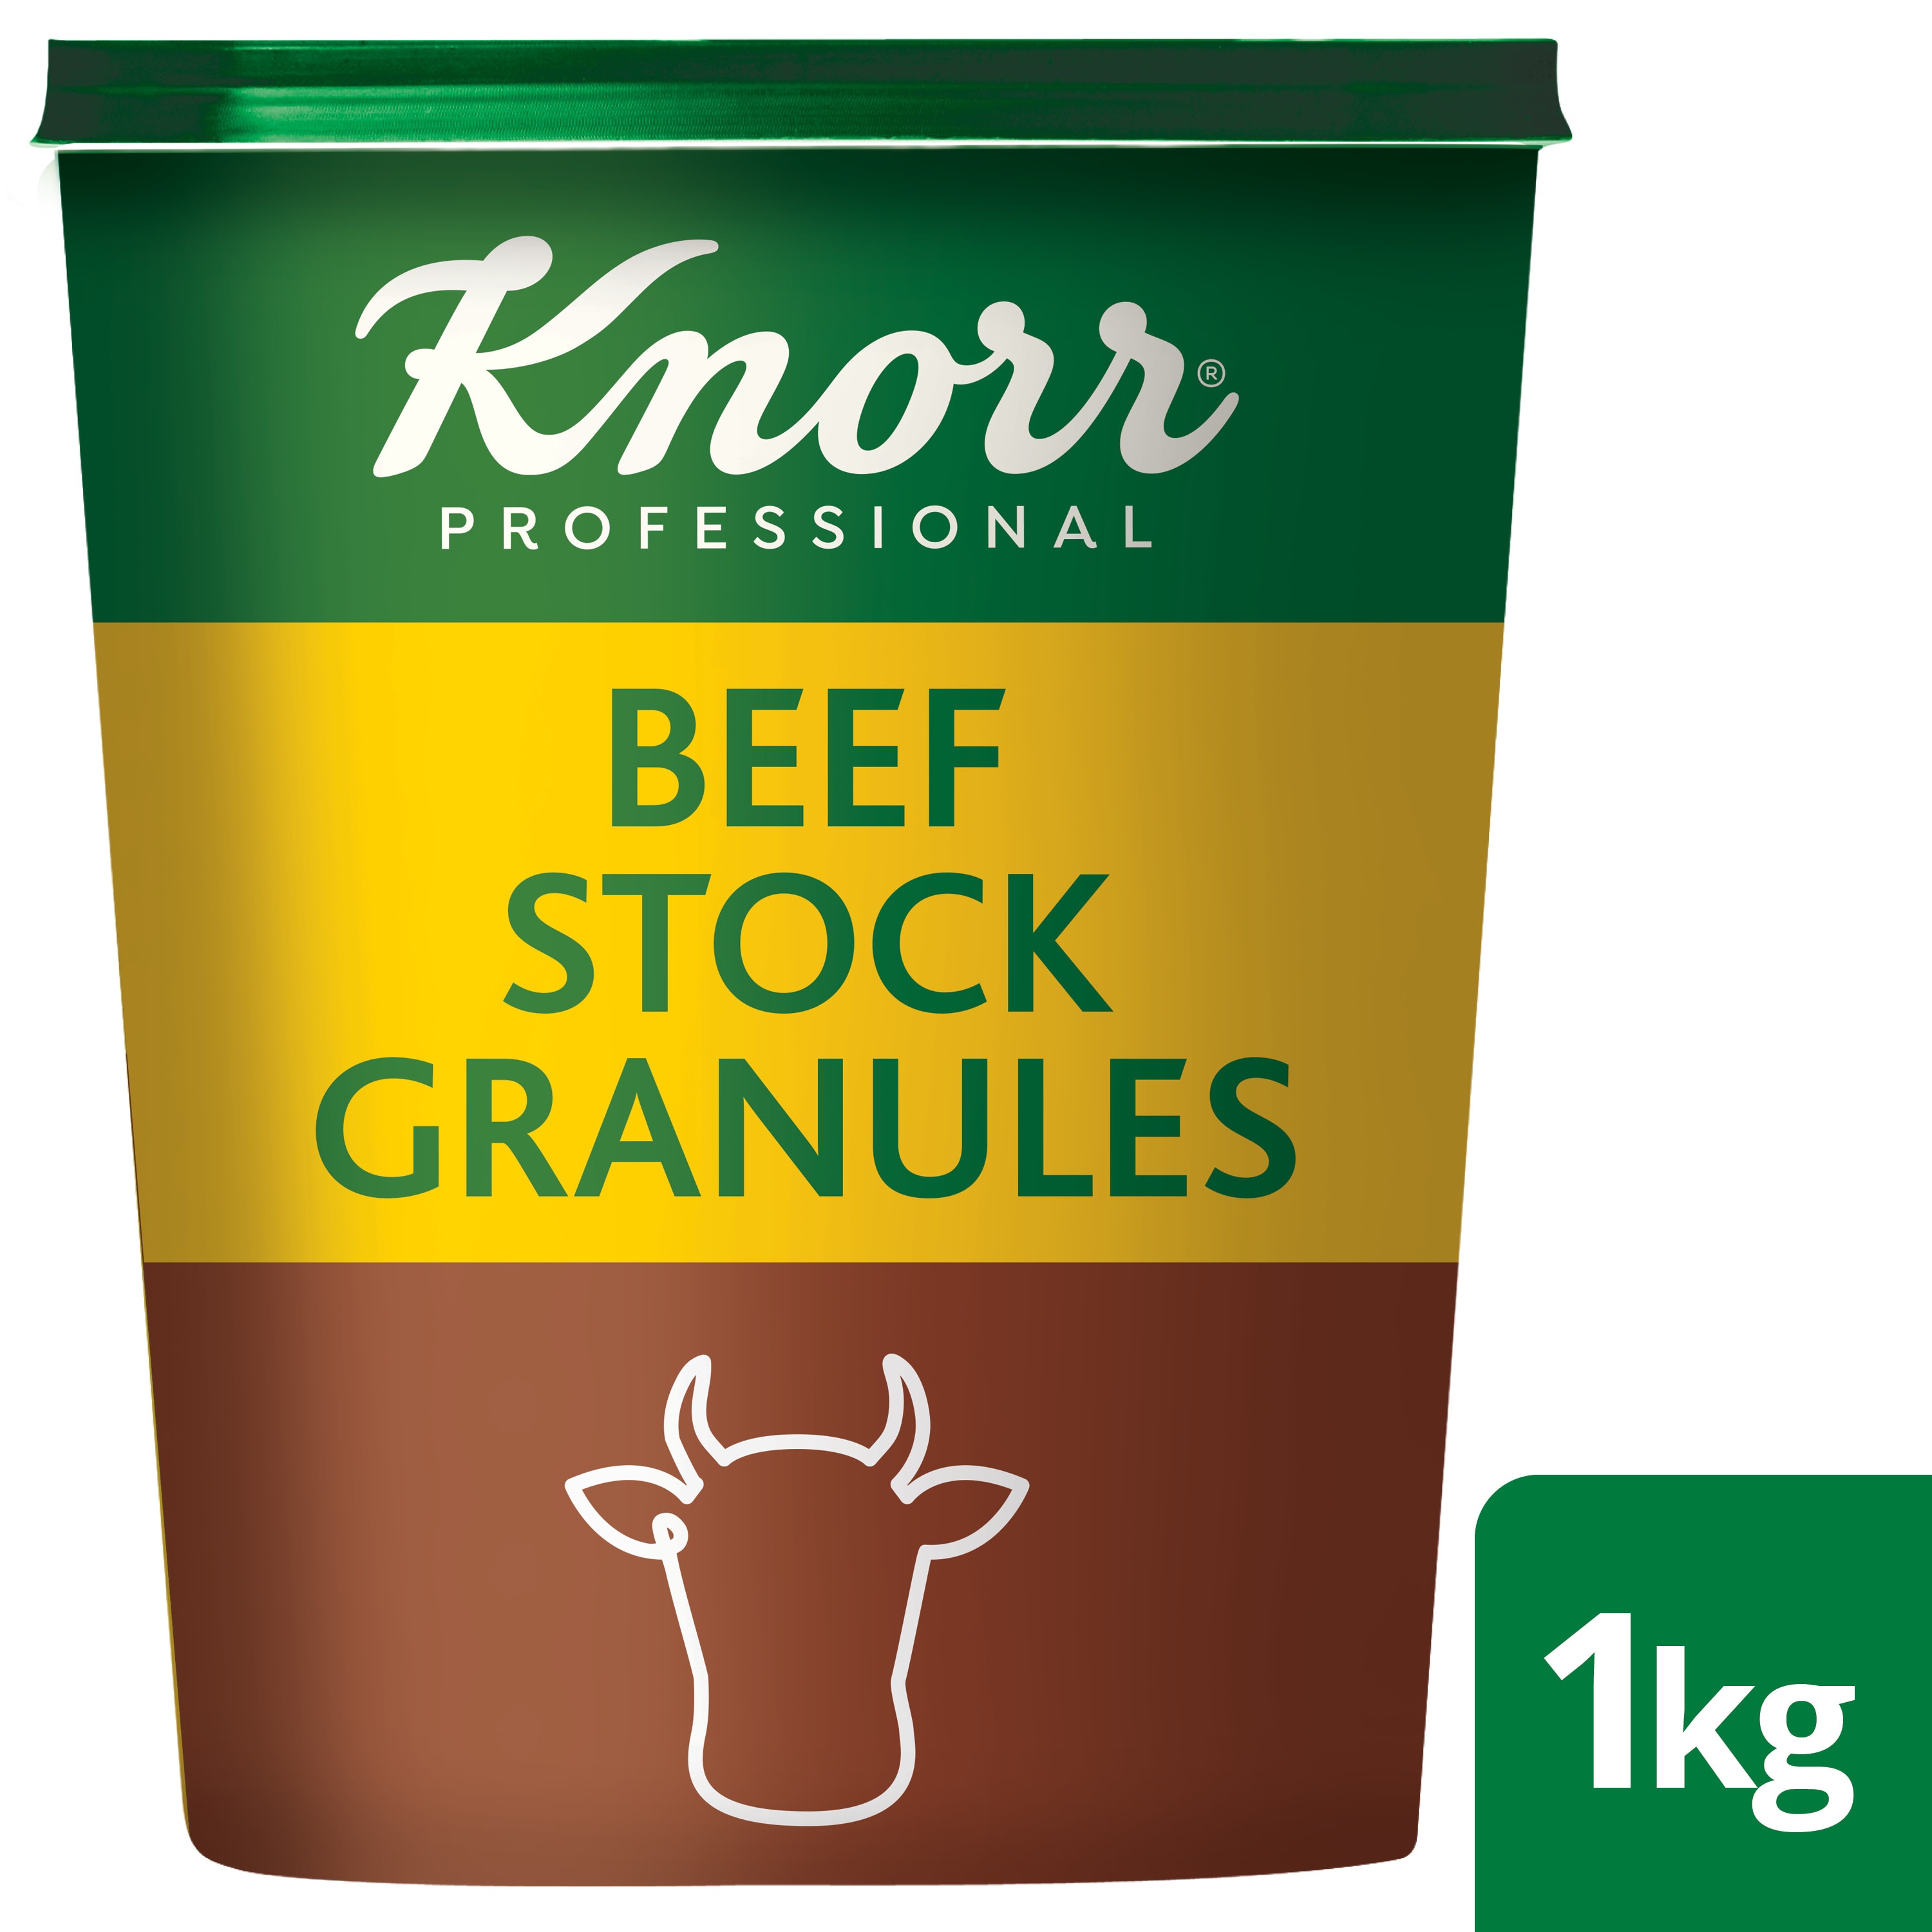 Knorr Professional Beef Stock Granules